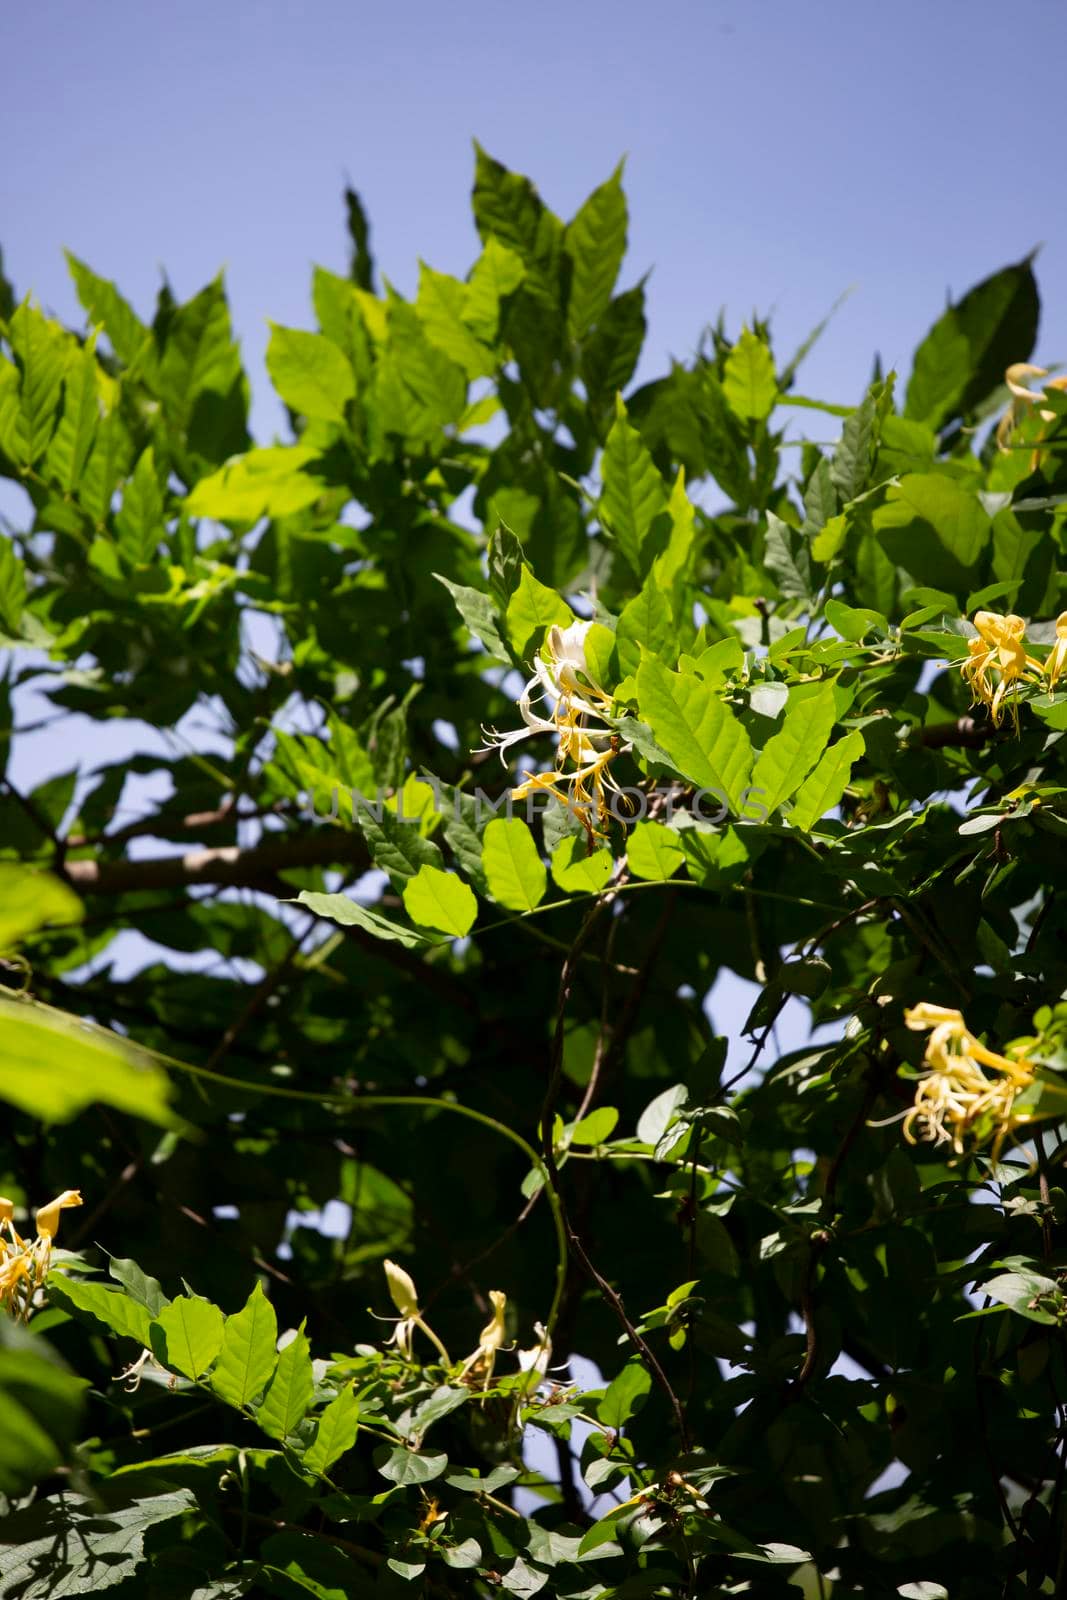 White and yellow honeysuckle) blooms both blossoming and about to blossom